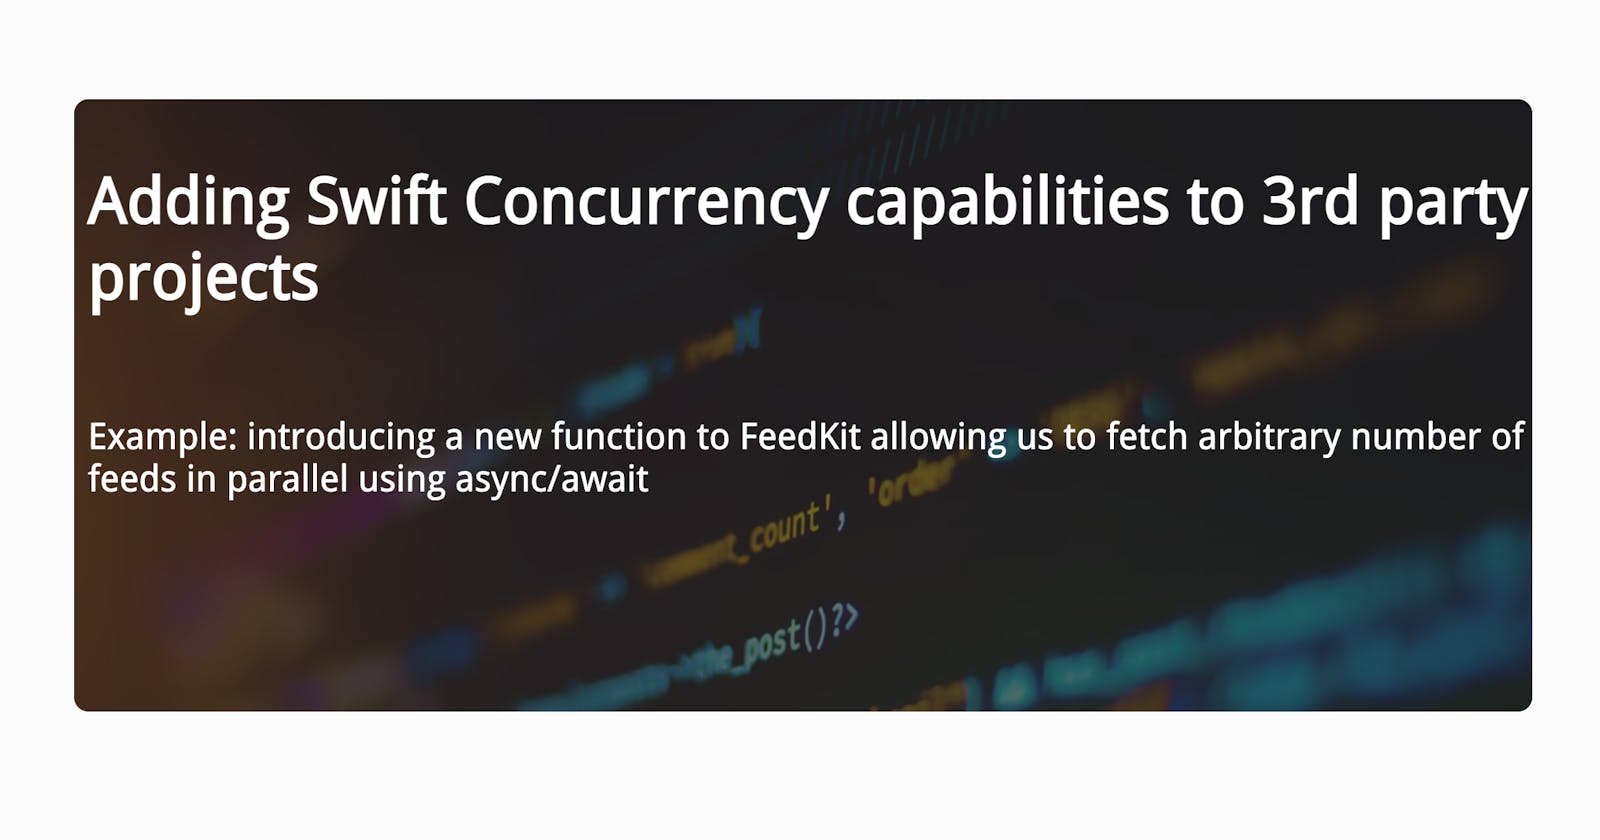 Adding Swift Concurrency capabilities to 3rd party projects